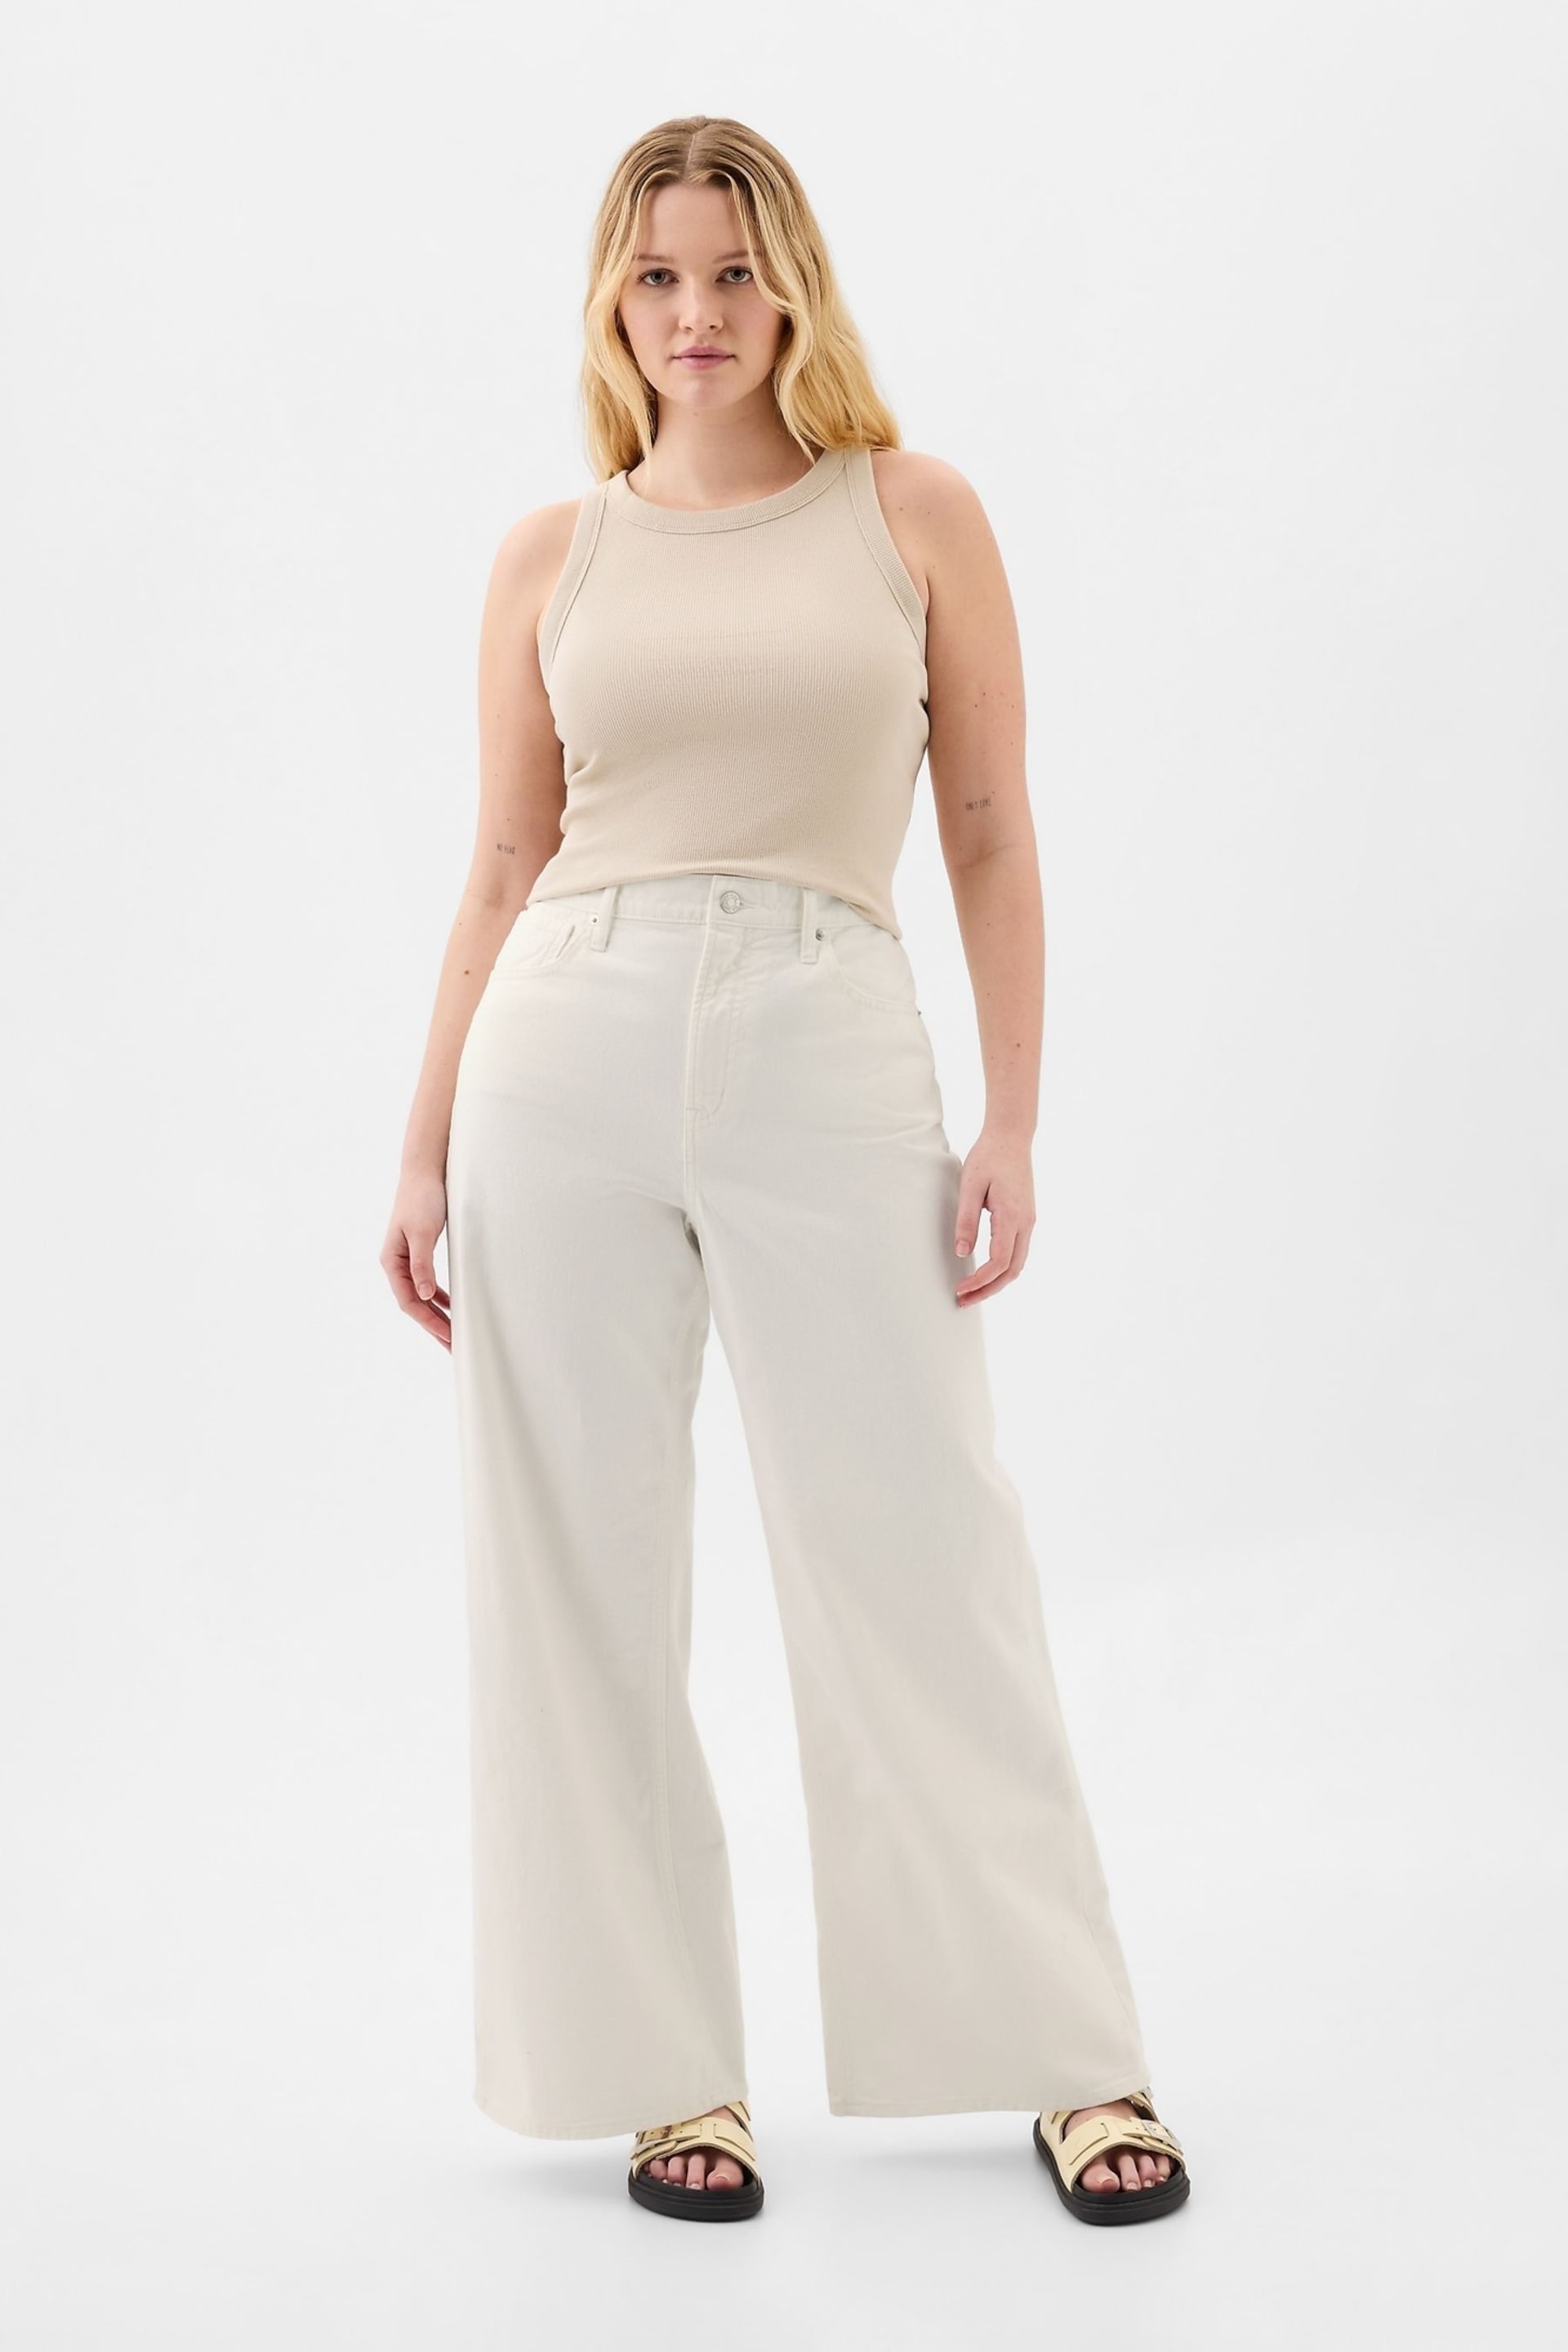 Gap White High Waisted Wide Leg Jeans - Image 1 of 7